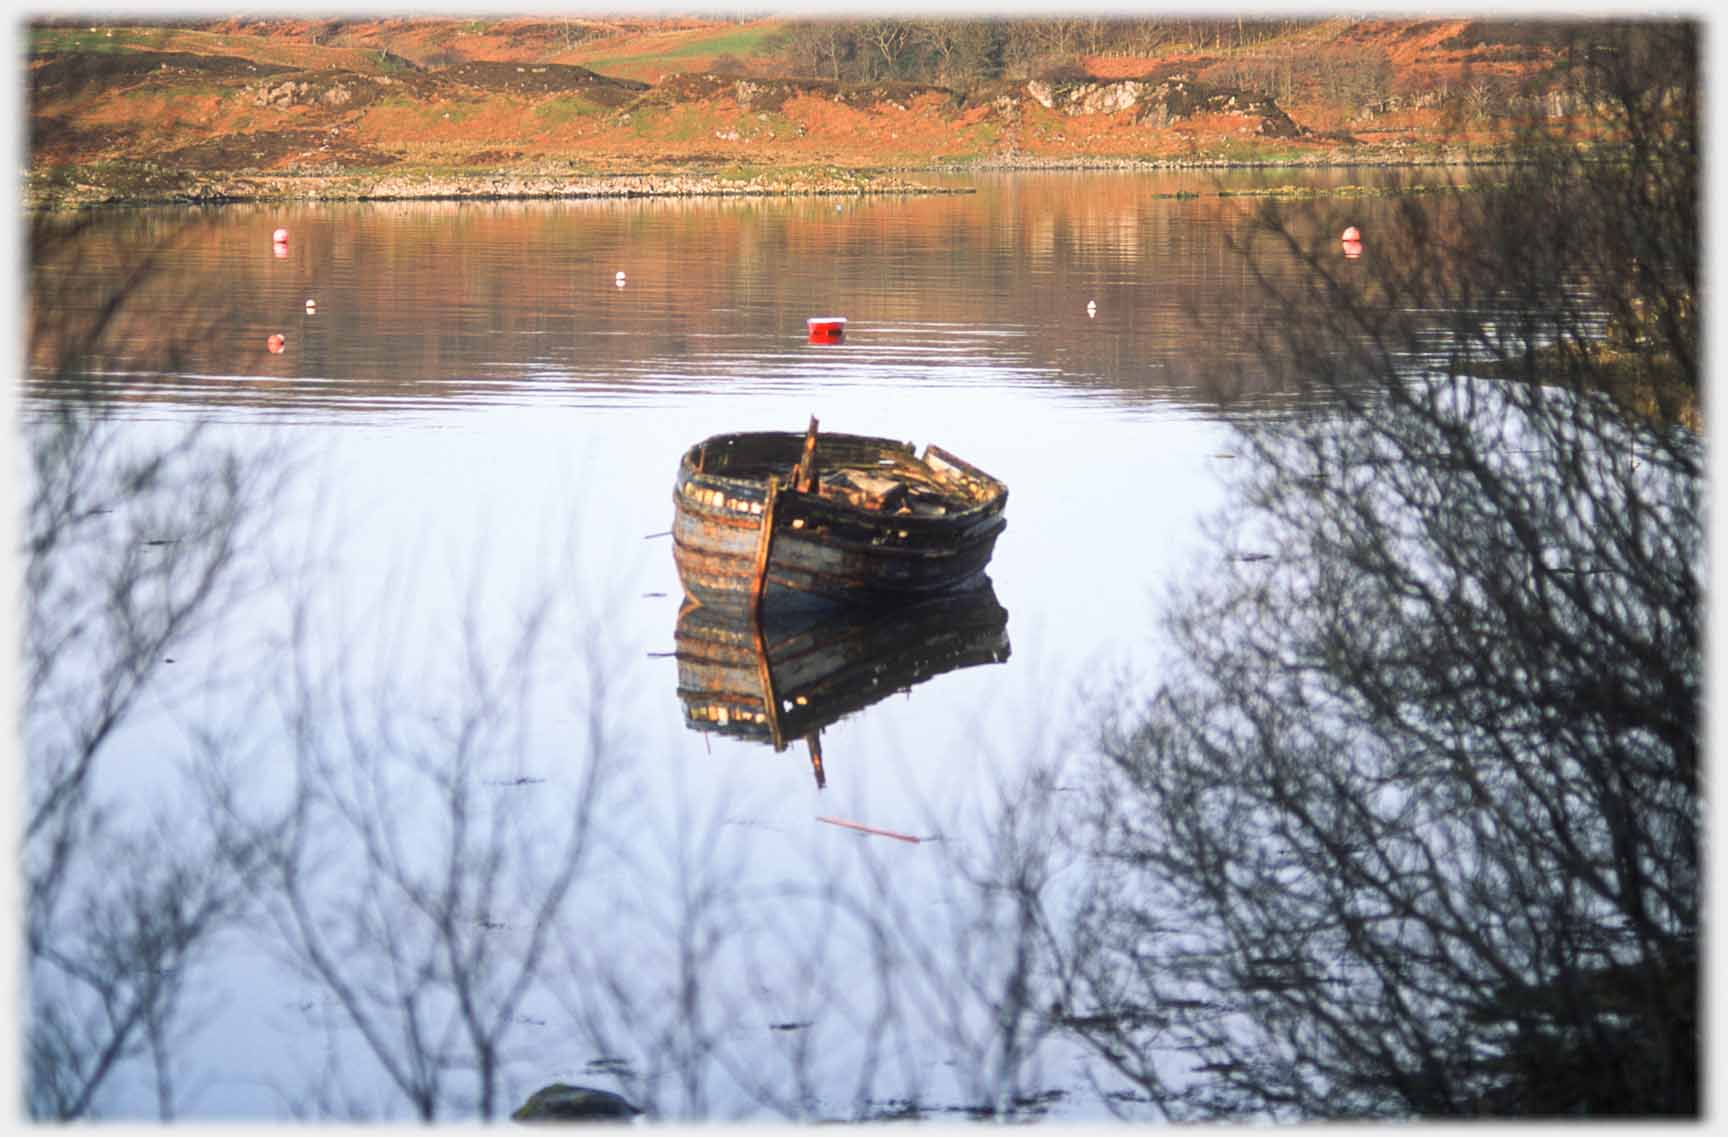 Single boat with fringe of tree branches.